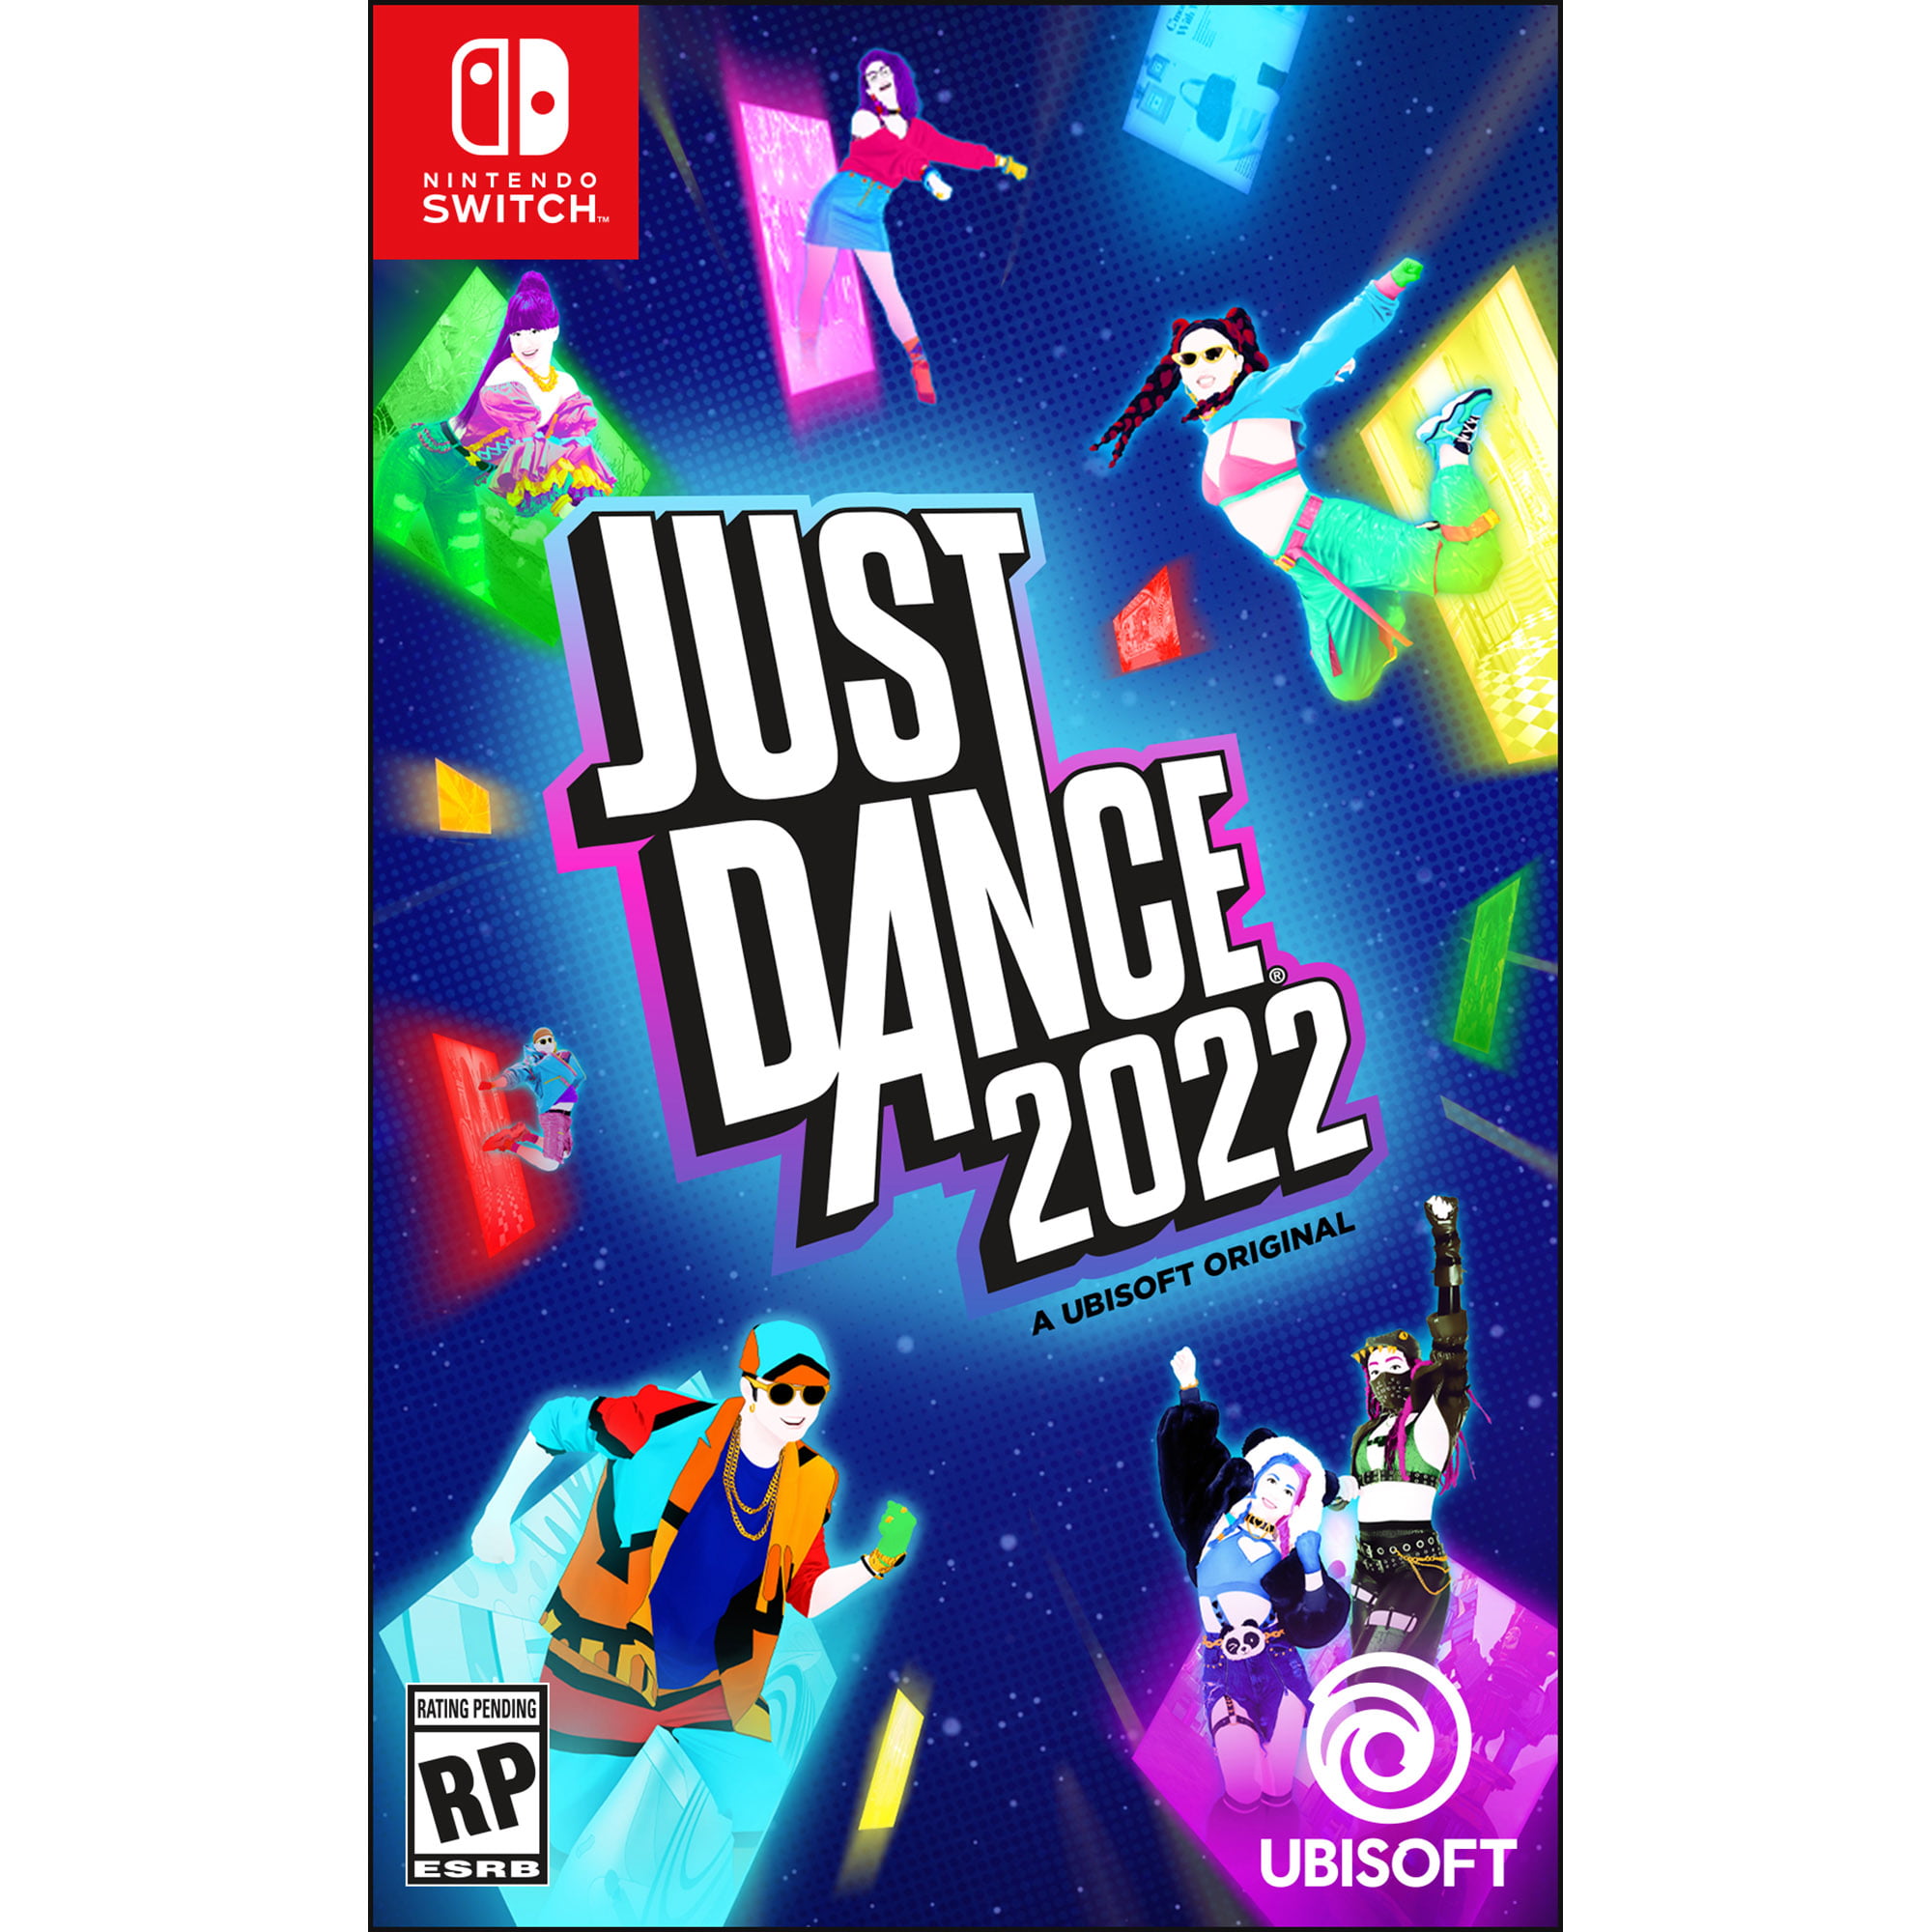 download just dance 4 nintendo switch for free